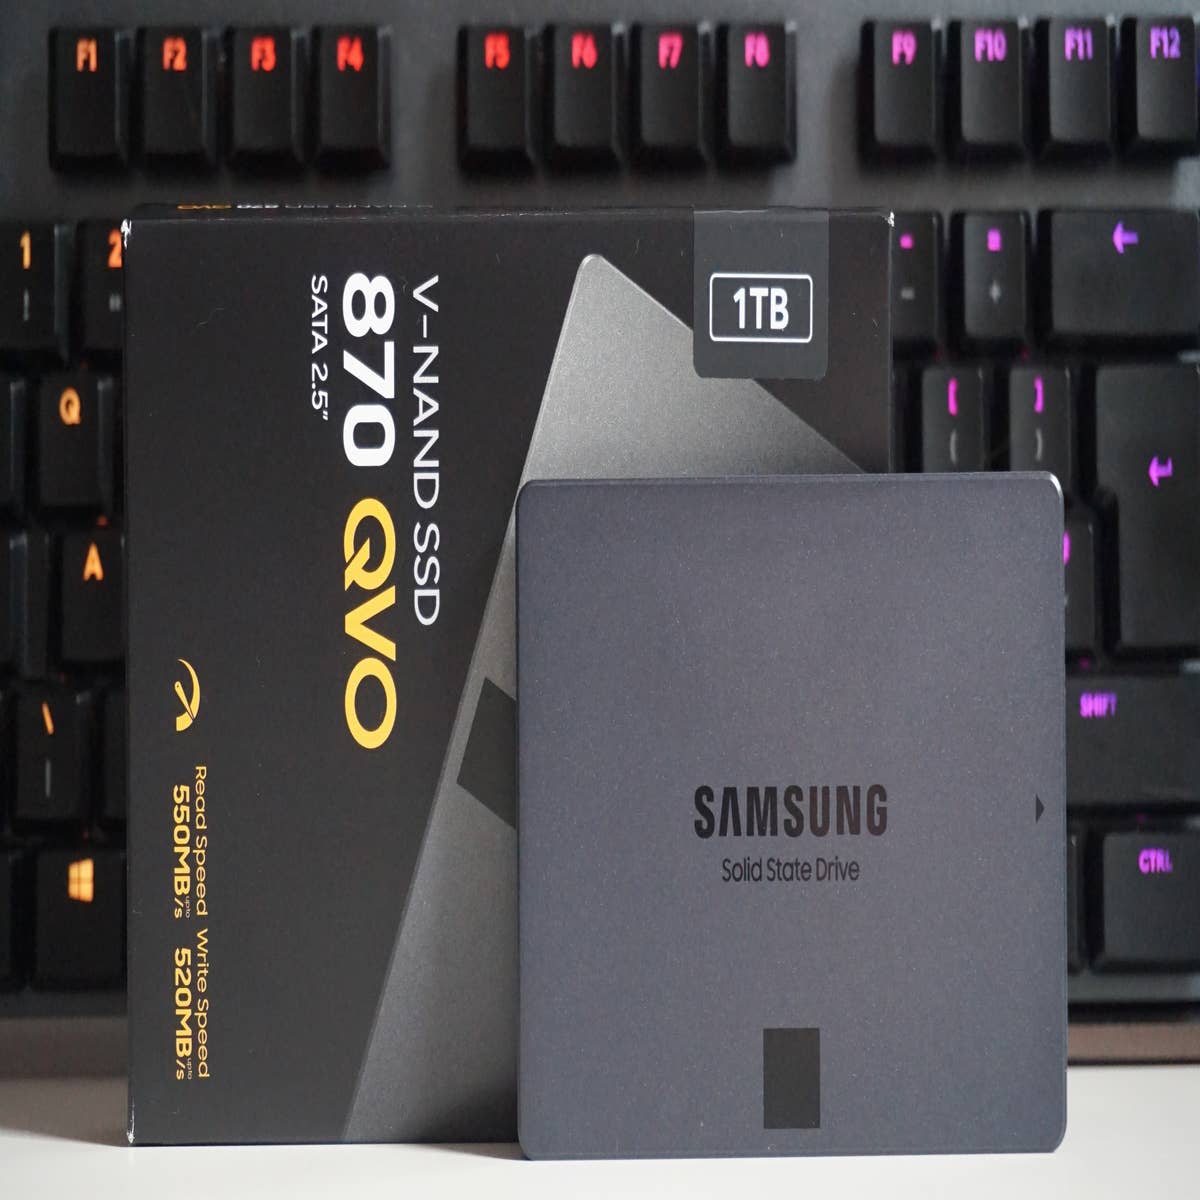 Samsung 870 Qvo review: the best that SATA SSDs have to offer